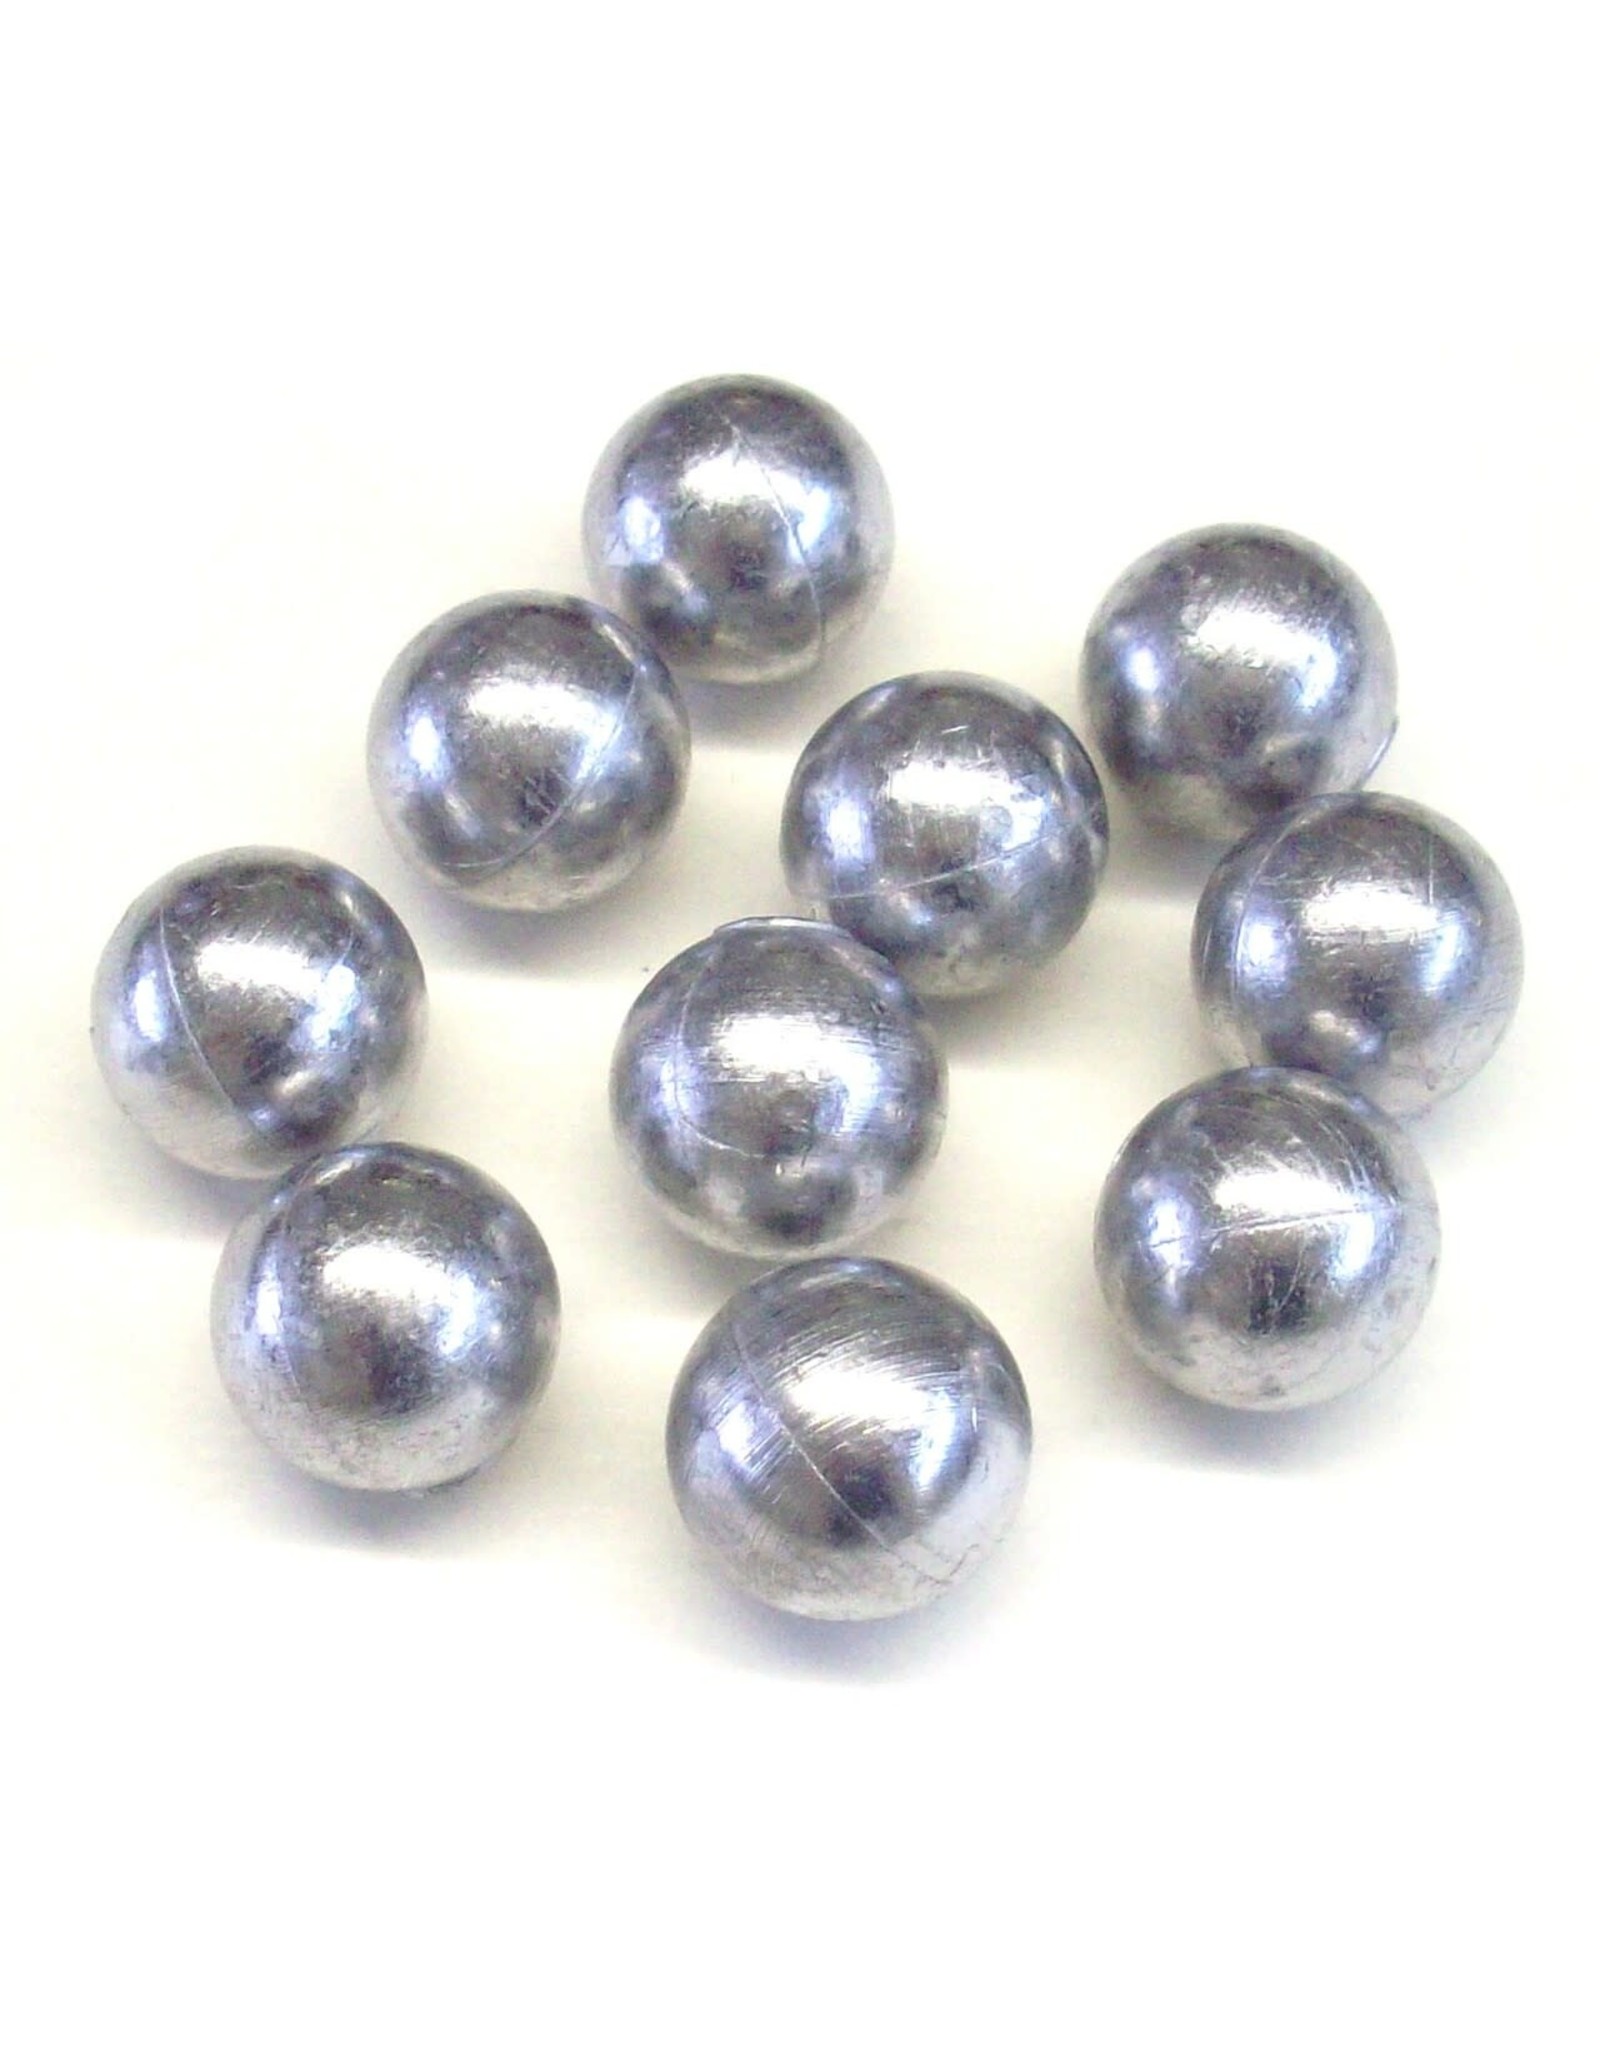 October Country October Country .50 cal Round Ball (.495") 180 Gr 100 Count